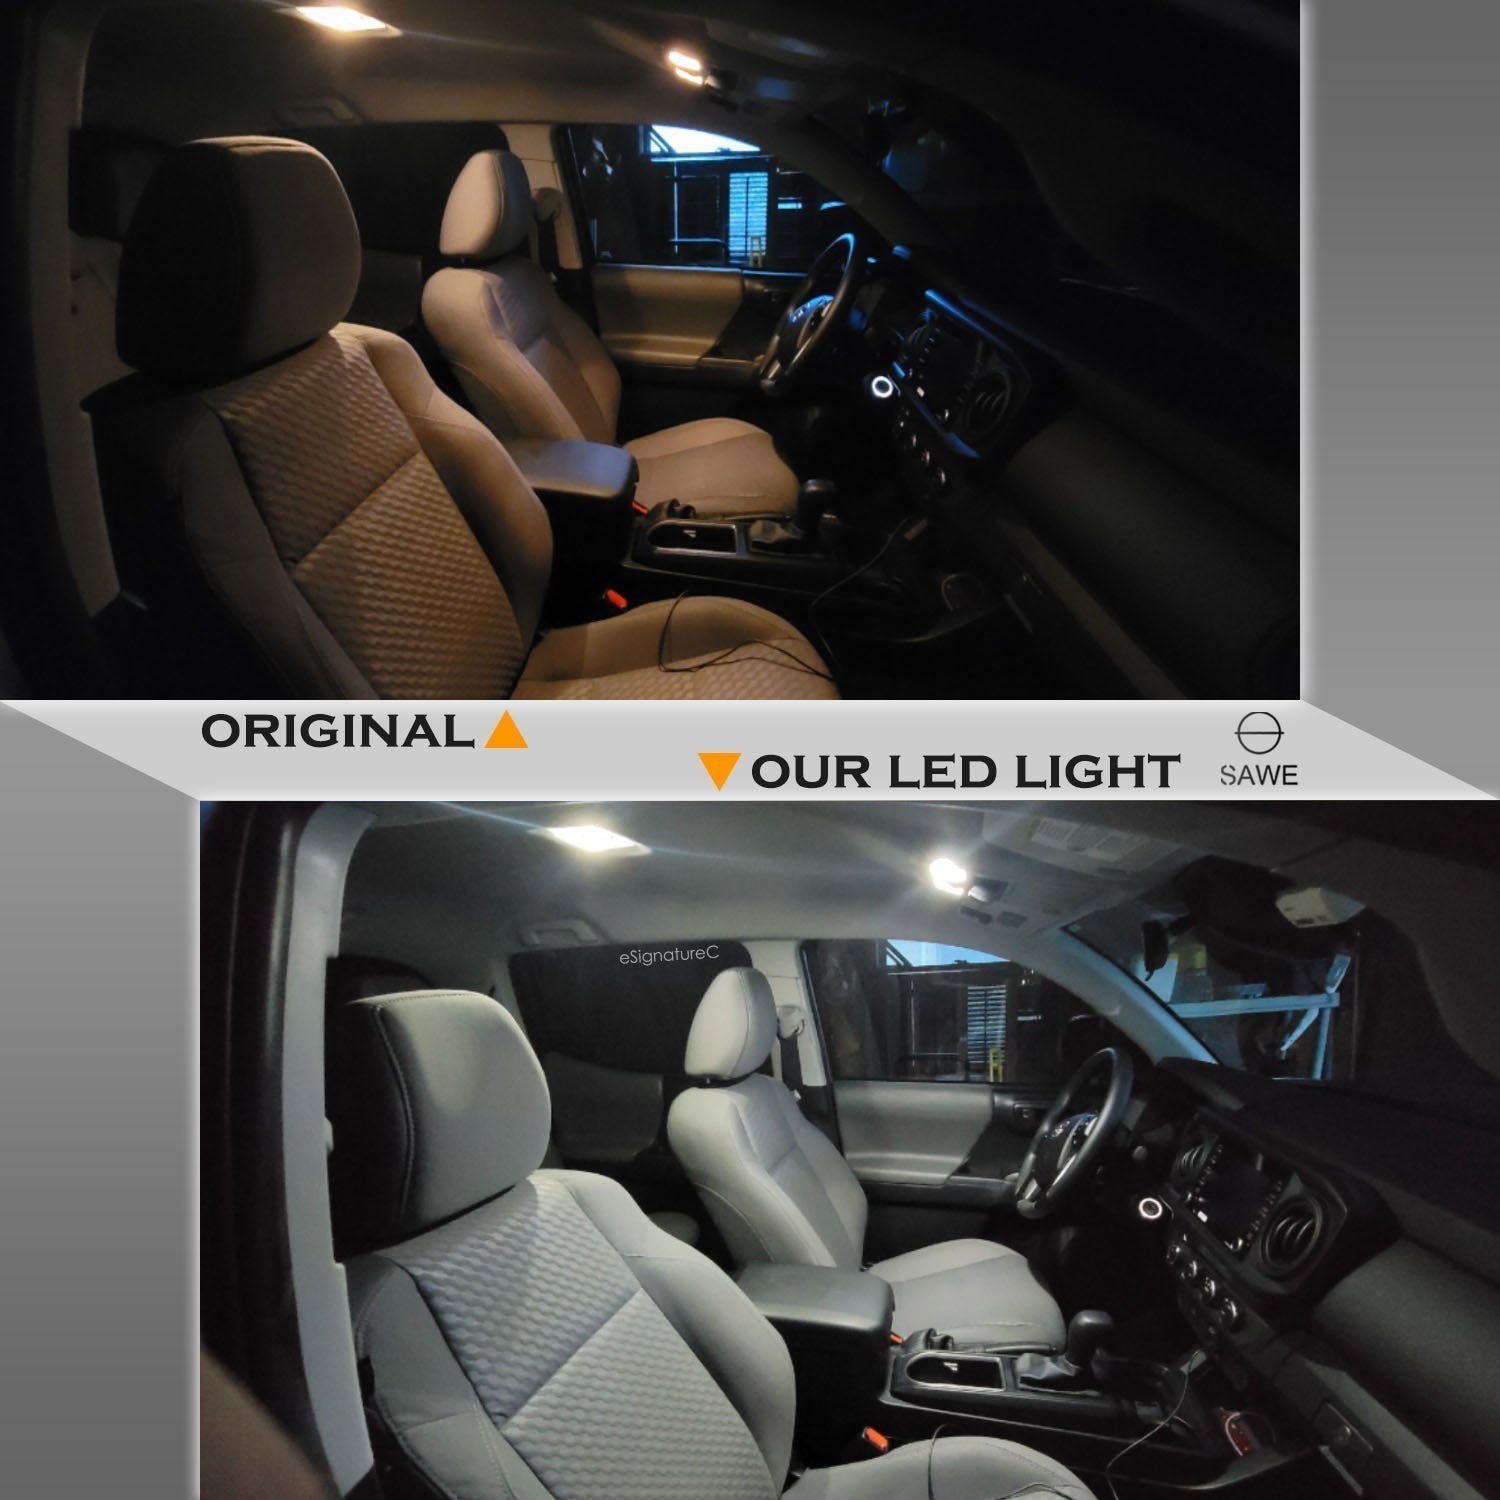 For Acura RDX Interior LED Lights - Dome & Map Light Bulbs Package Kit for 2013 - 2018 - White